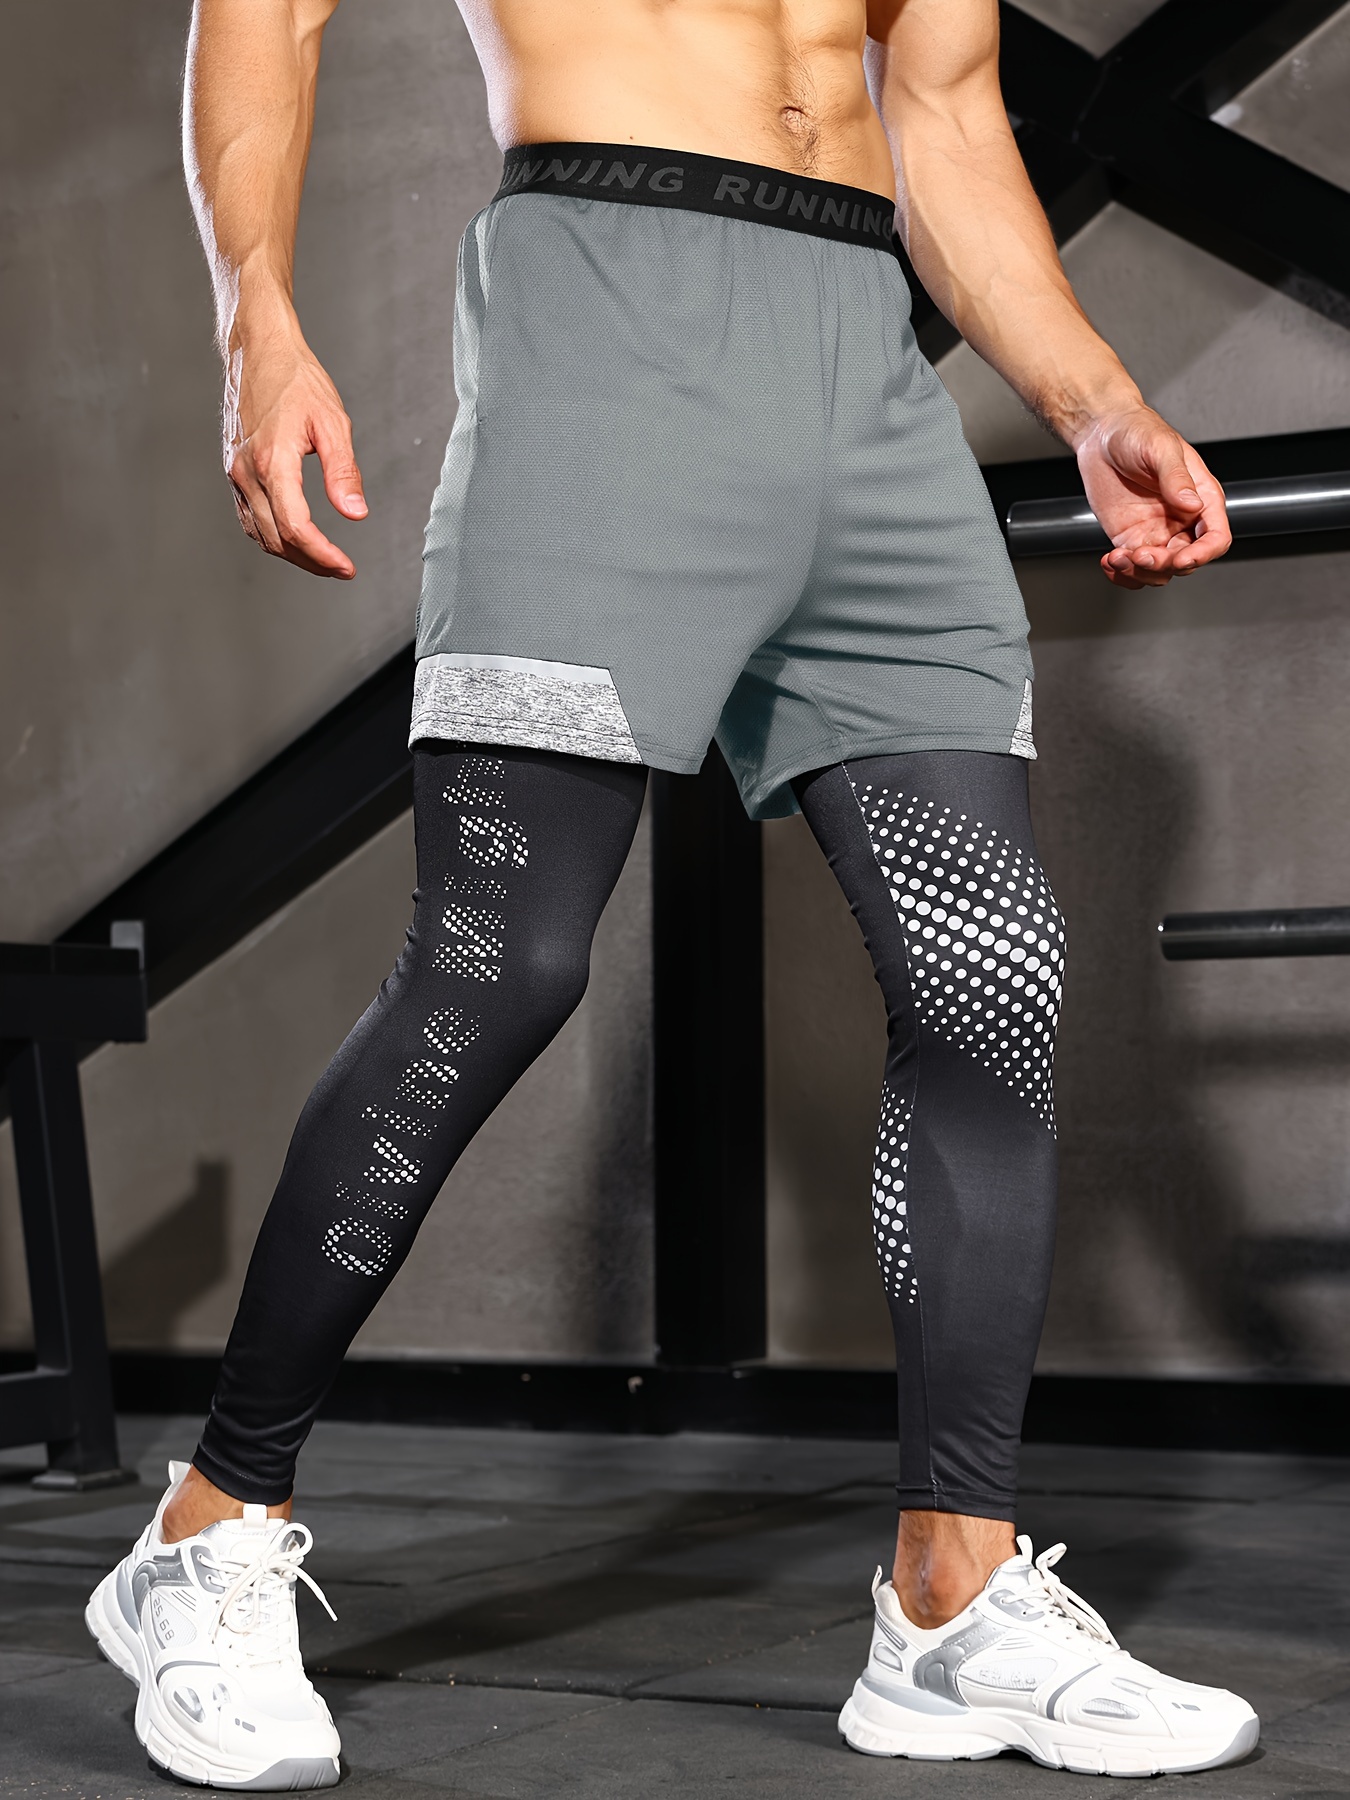 Compression Gear Improves Running Performance and Recovery